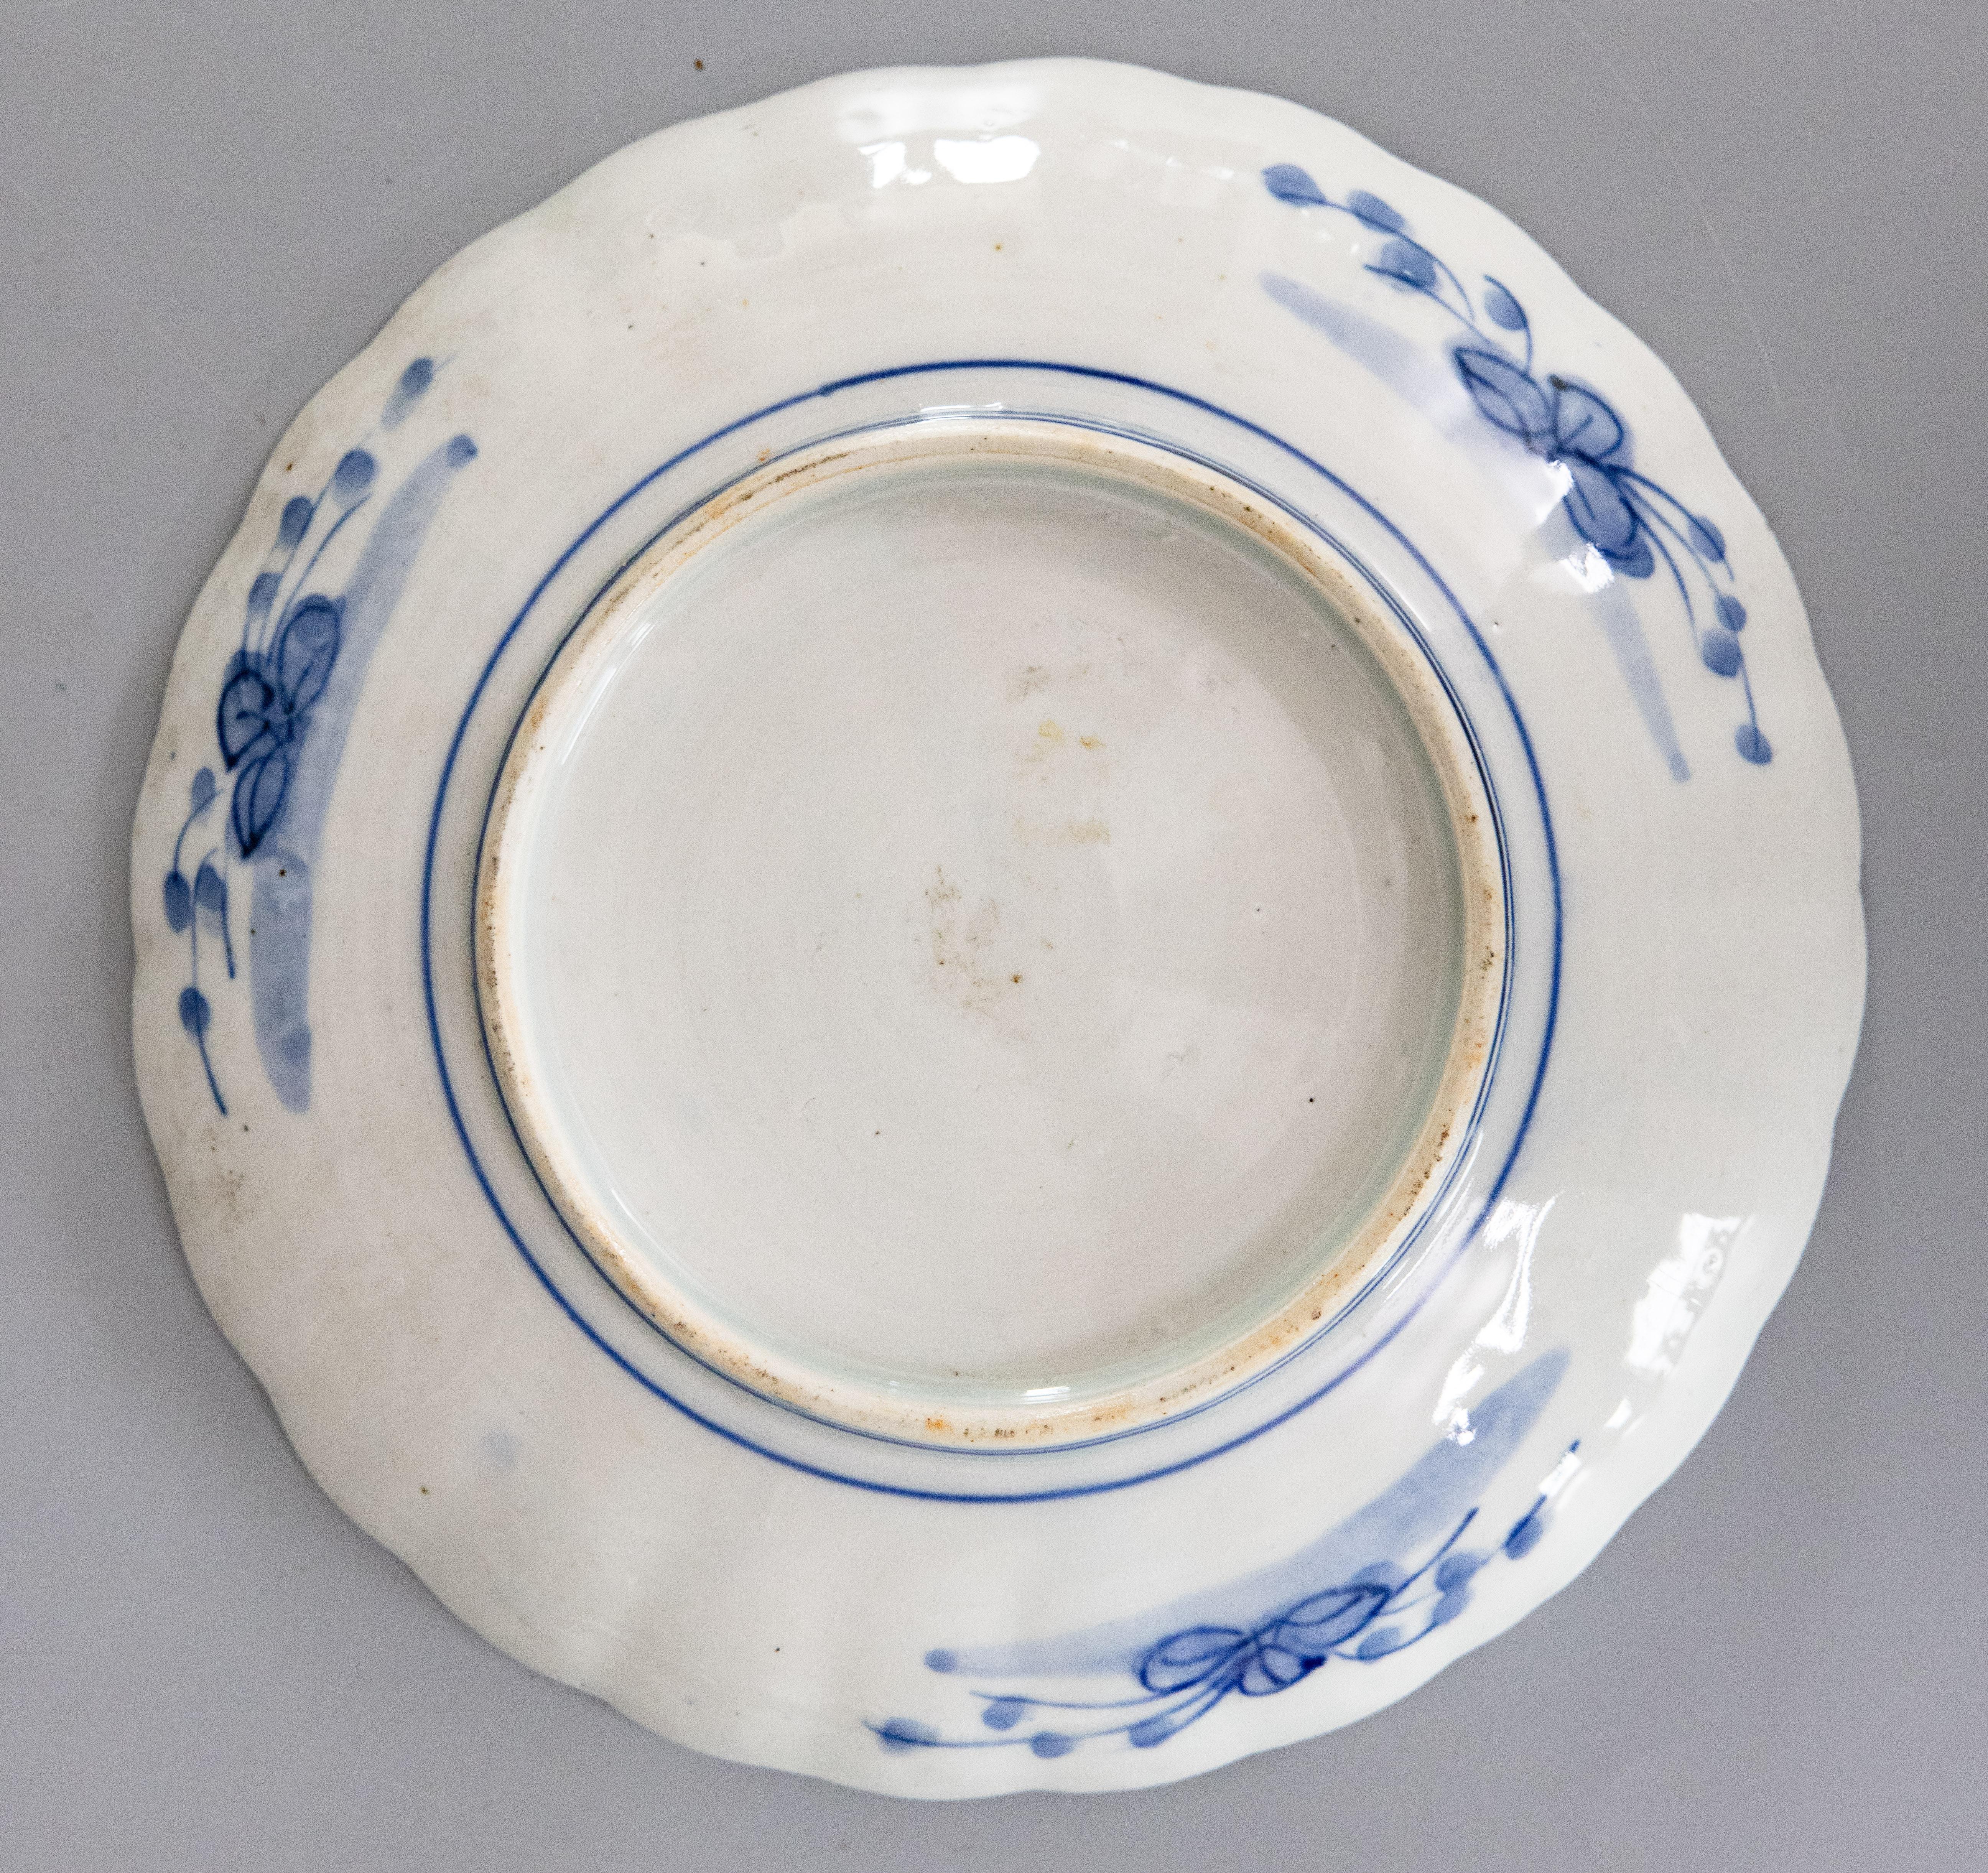 Antique 19th Century Japanese Imari Scalloped Plate In Good Condition For Sale In Pearland, TX